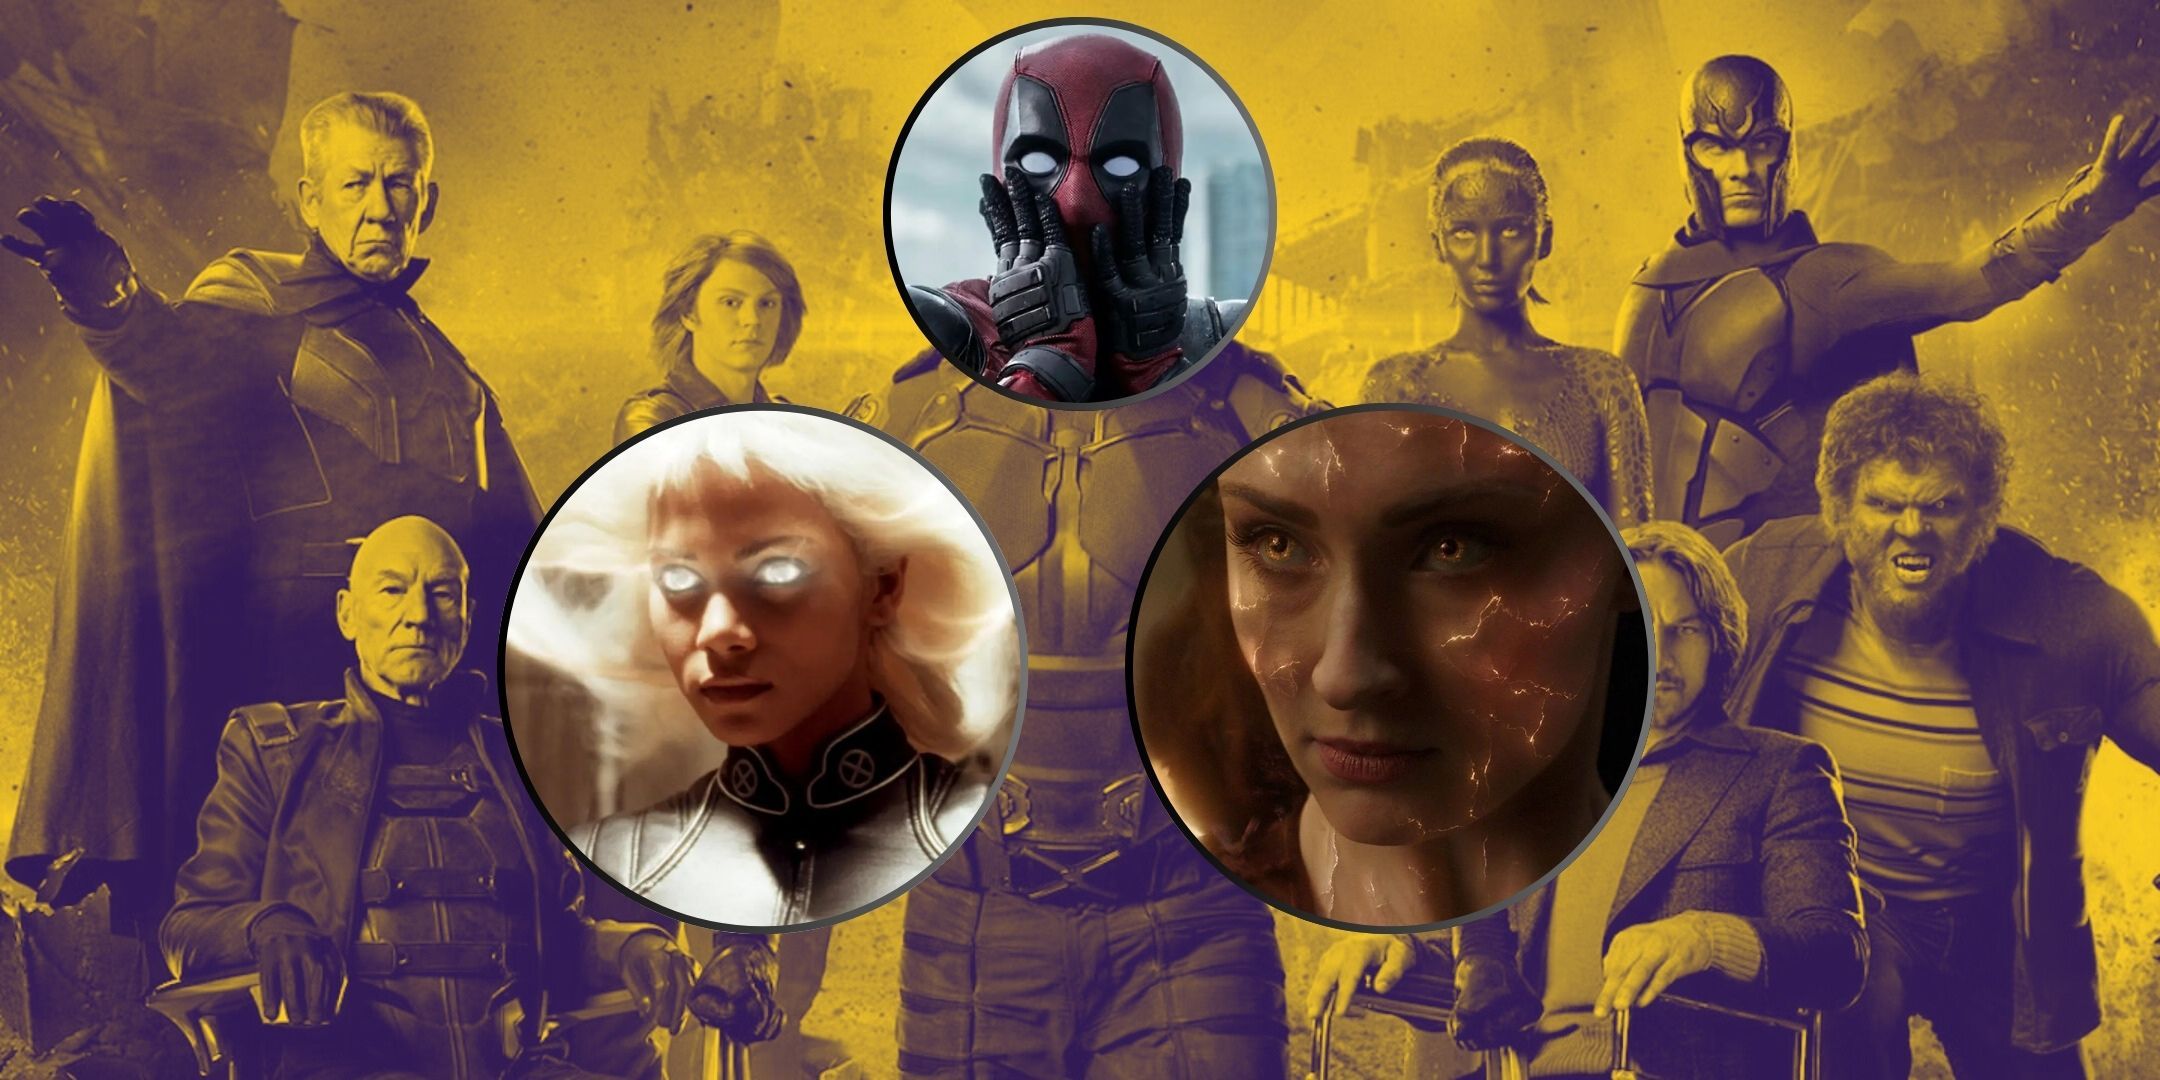 X-Men Movies Featured Image Yellow X-Men Poster in background with Deadpool, Storm, and Jean Grey's heads on circles in the foreground